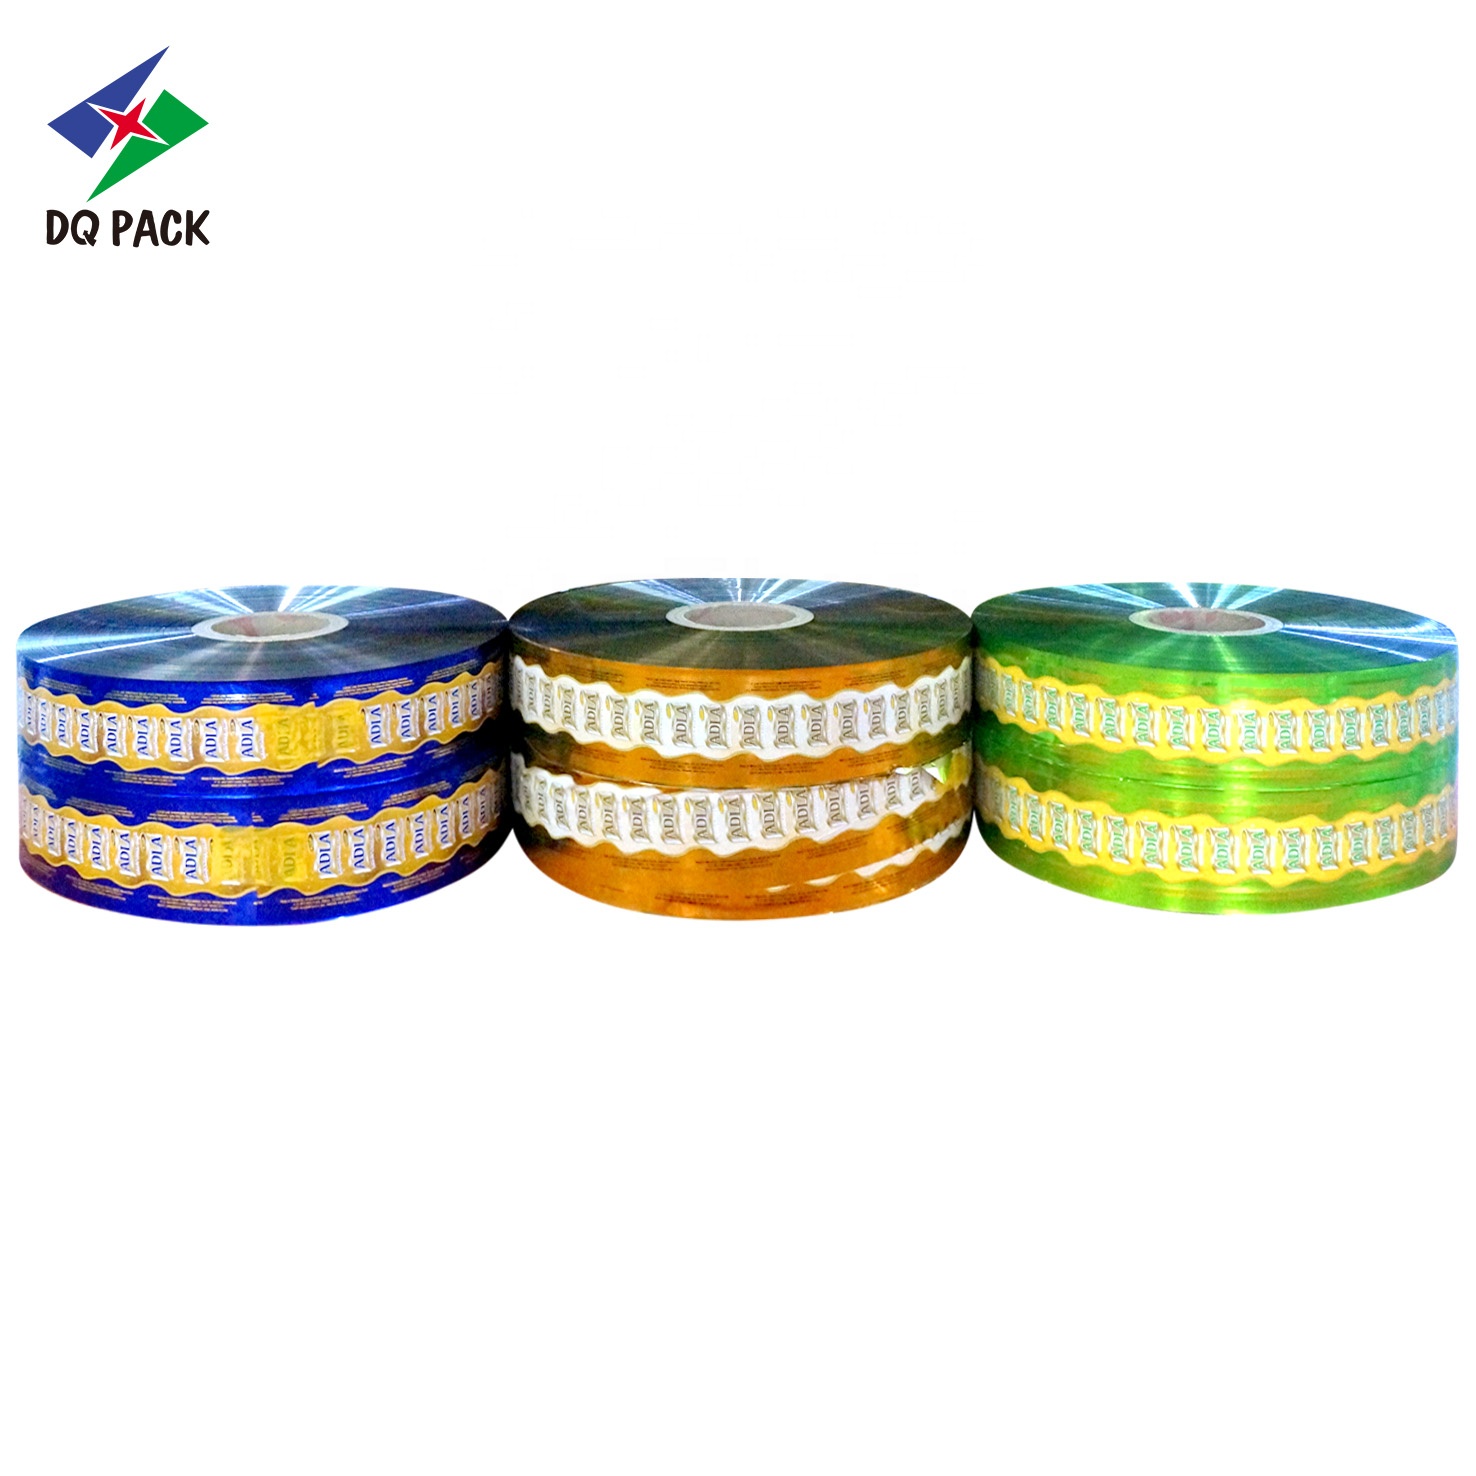 DQ PACK Customized Printed Free Sample Candy Wrapper Packaging Materials Metallized PET Twist Film Roll